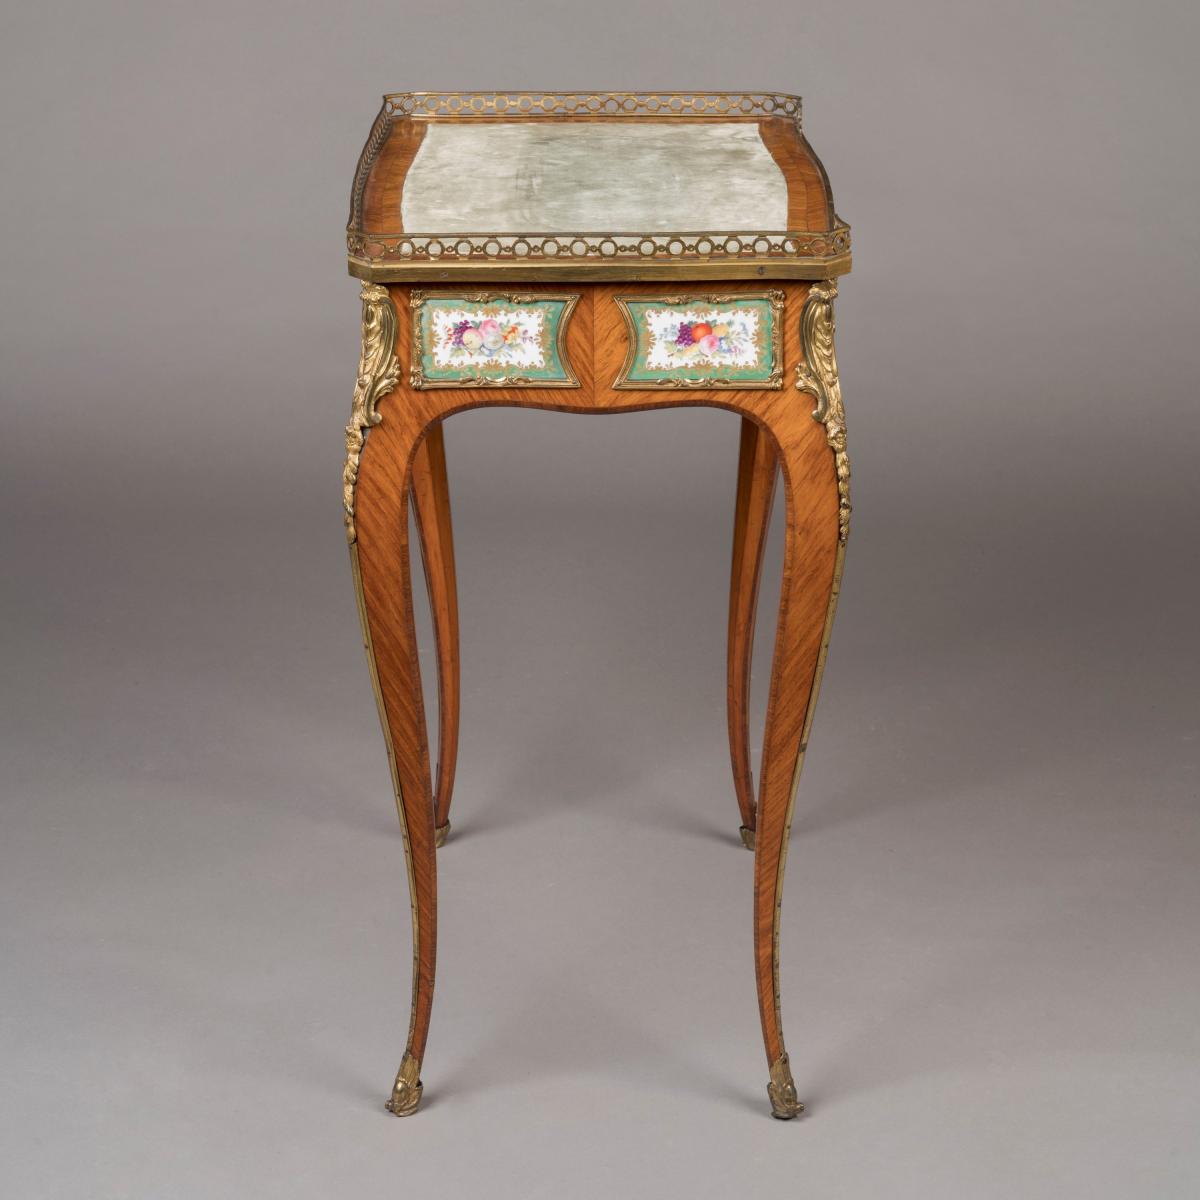 Porcelain-Mounted Occasional Table